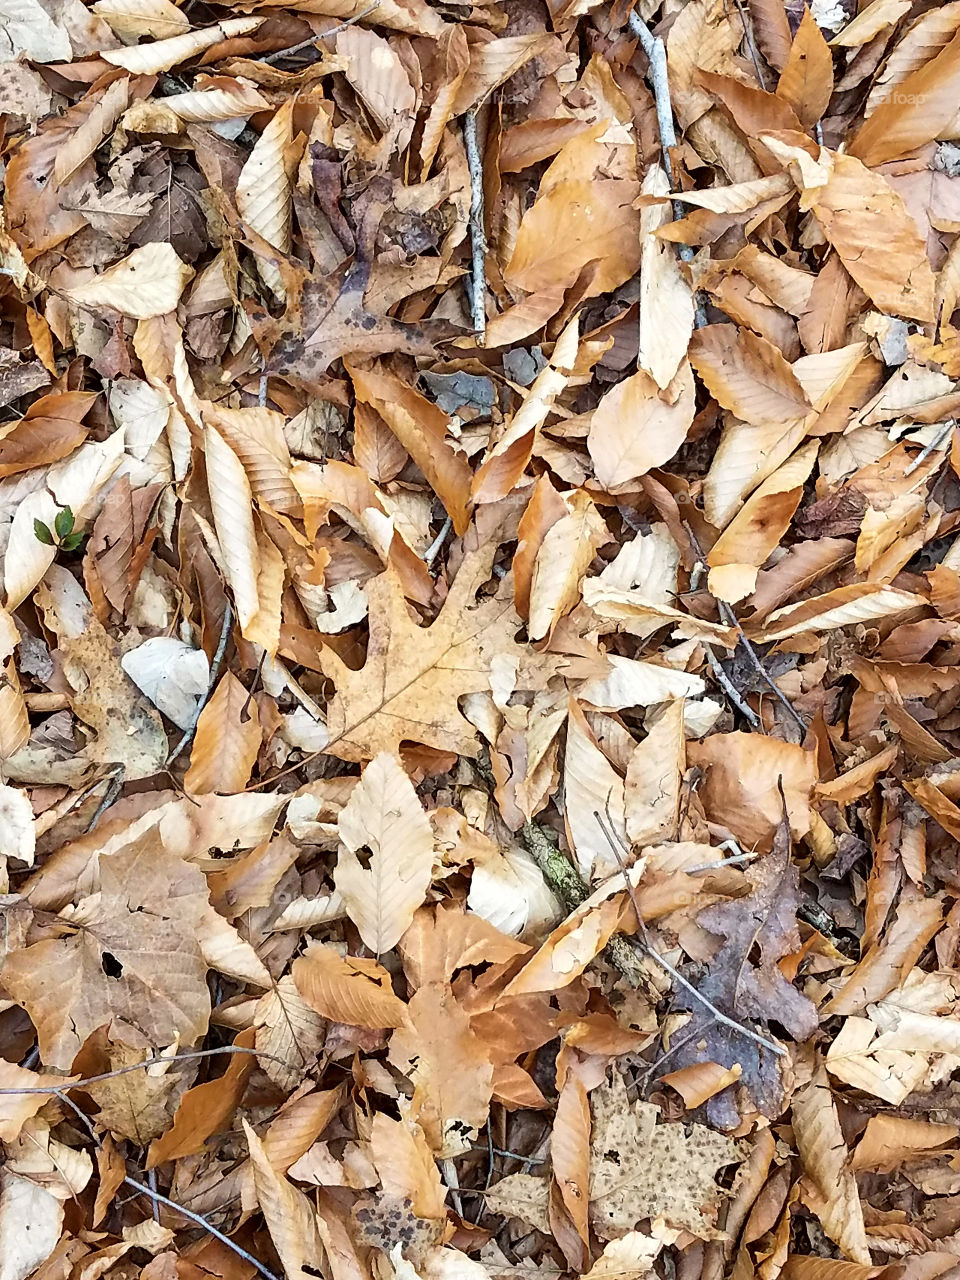 Lots of fallen leaves accumulating on the ground.